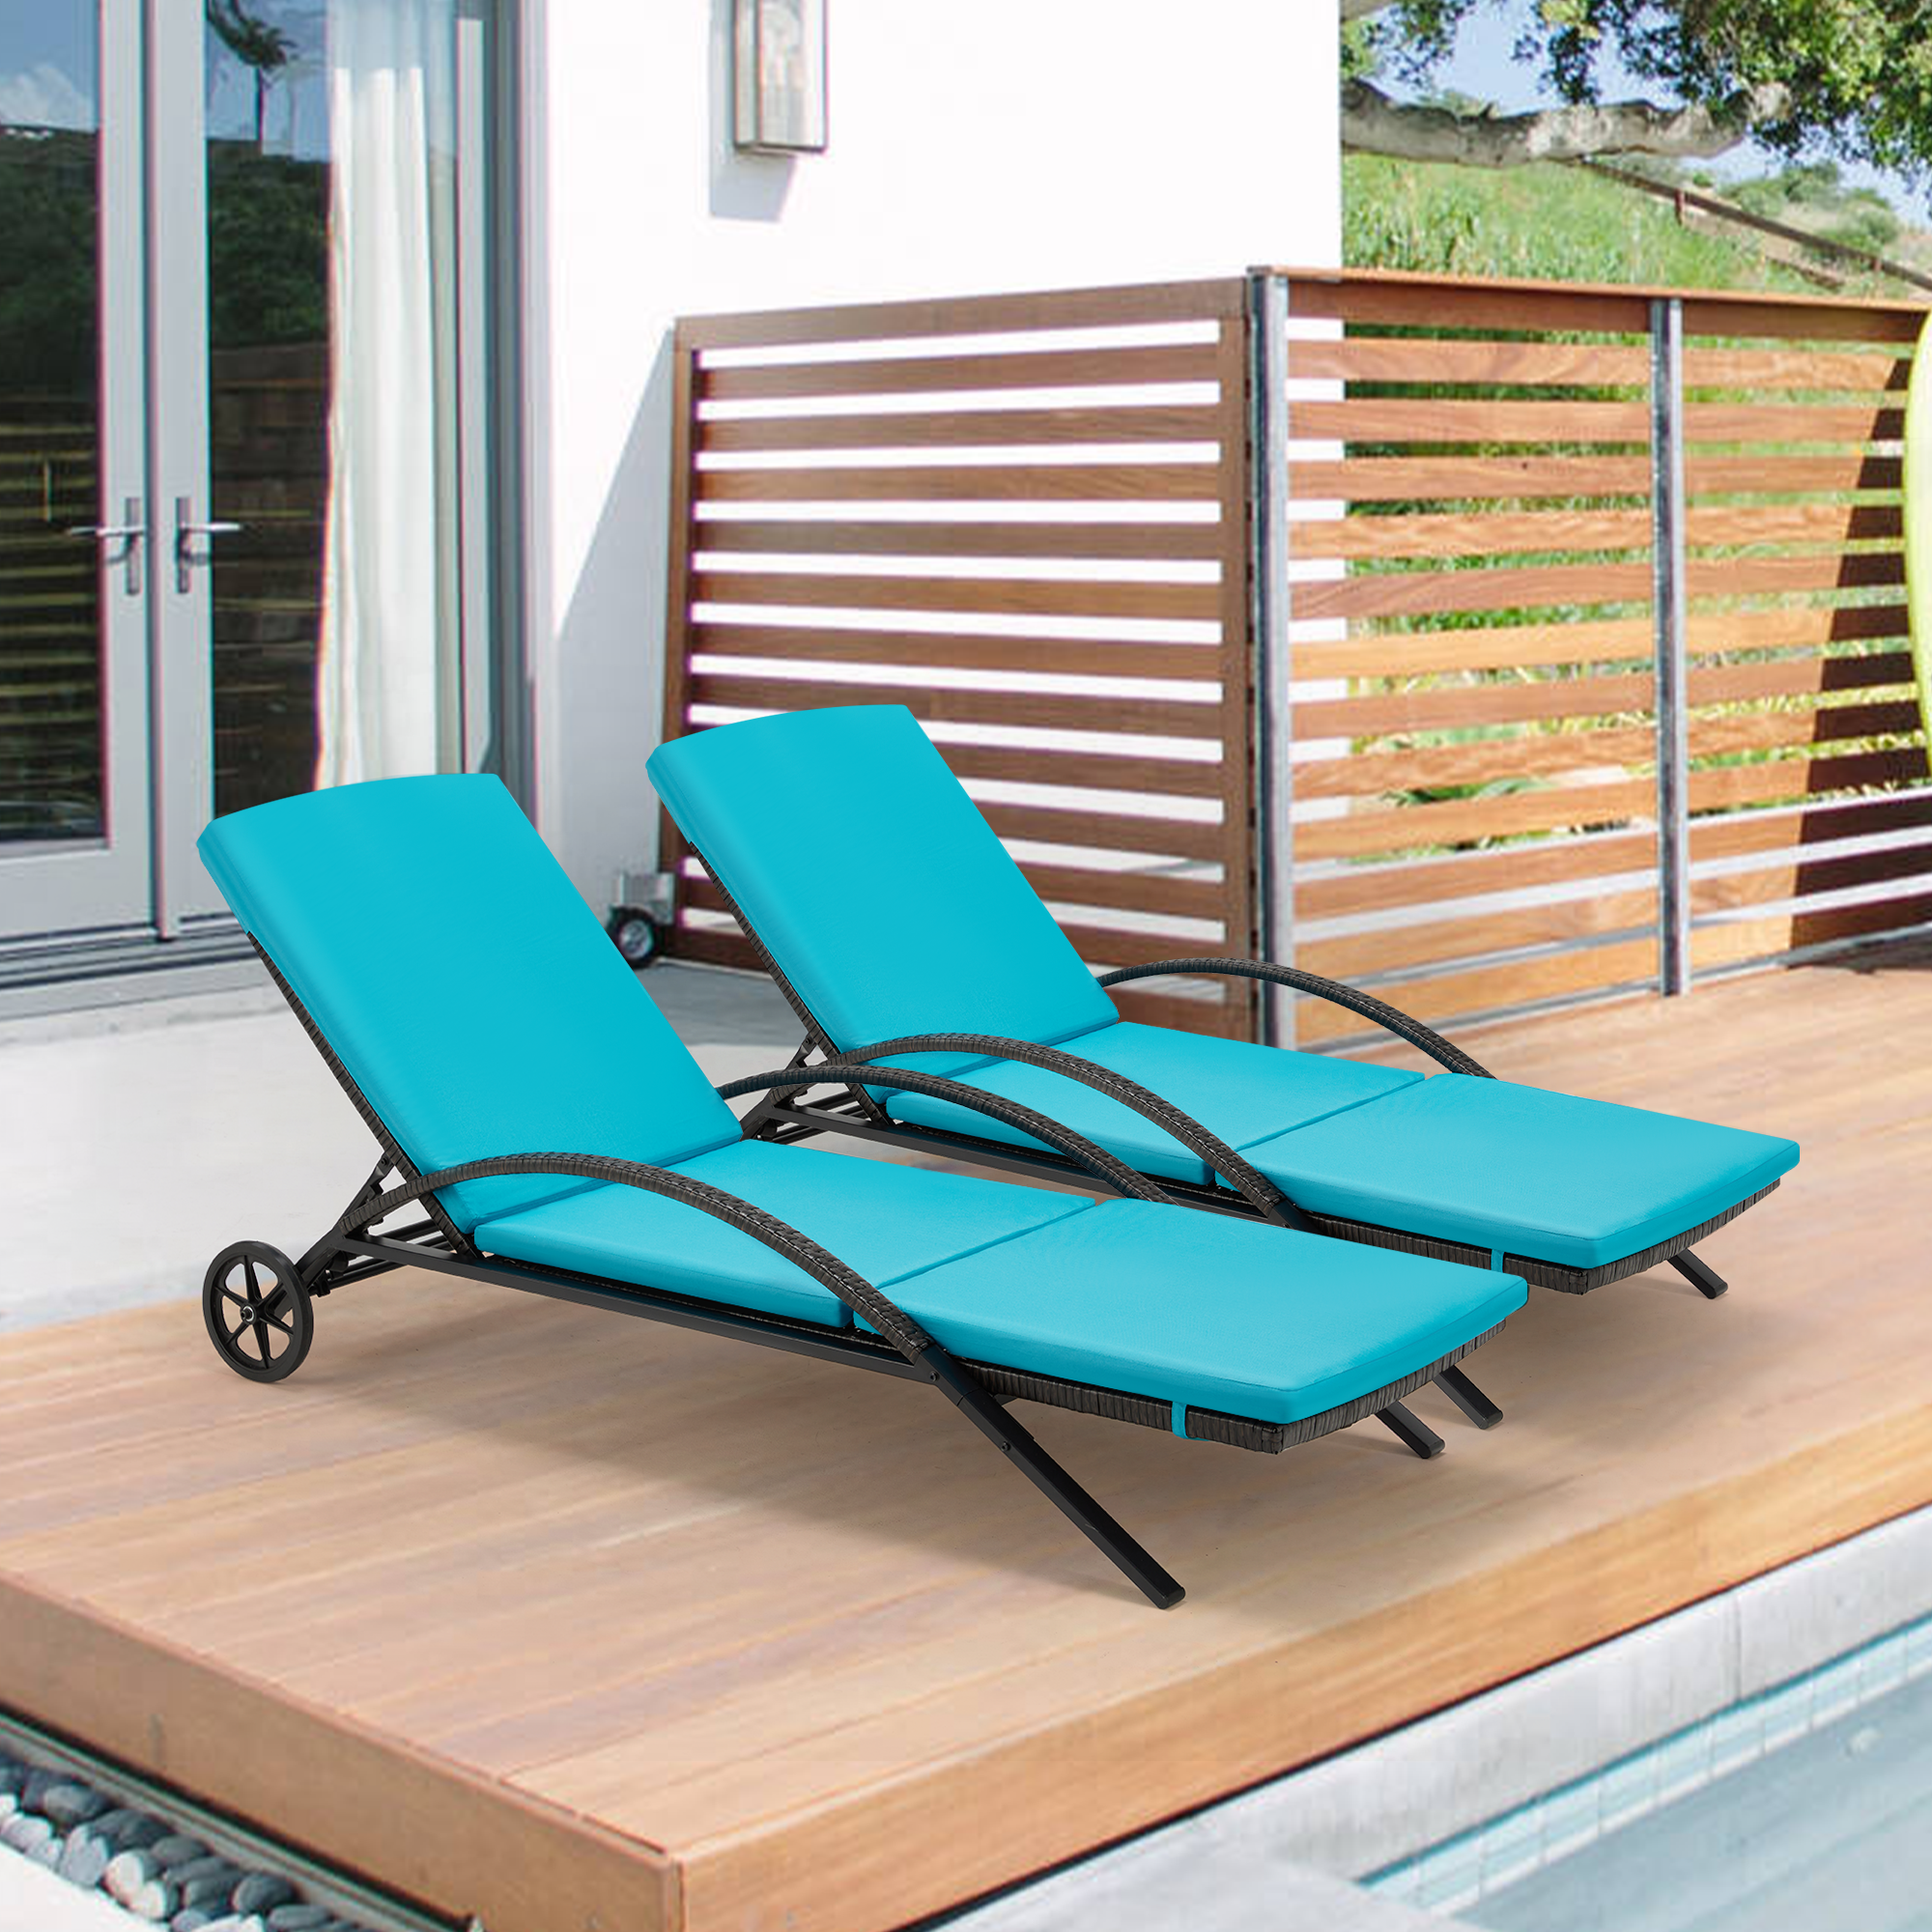 homrest-outdoor-chaise-lounge-chair-set-of-2-pe-rattan-wicker-pool-lounge-chair-arm-rest-with-5-adjustable-position-flexible-wheels-and-thick-removable-cushion-for-poolside-patio-porch-backyard-blue